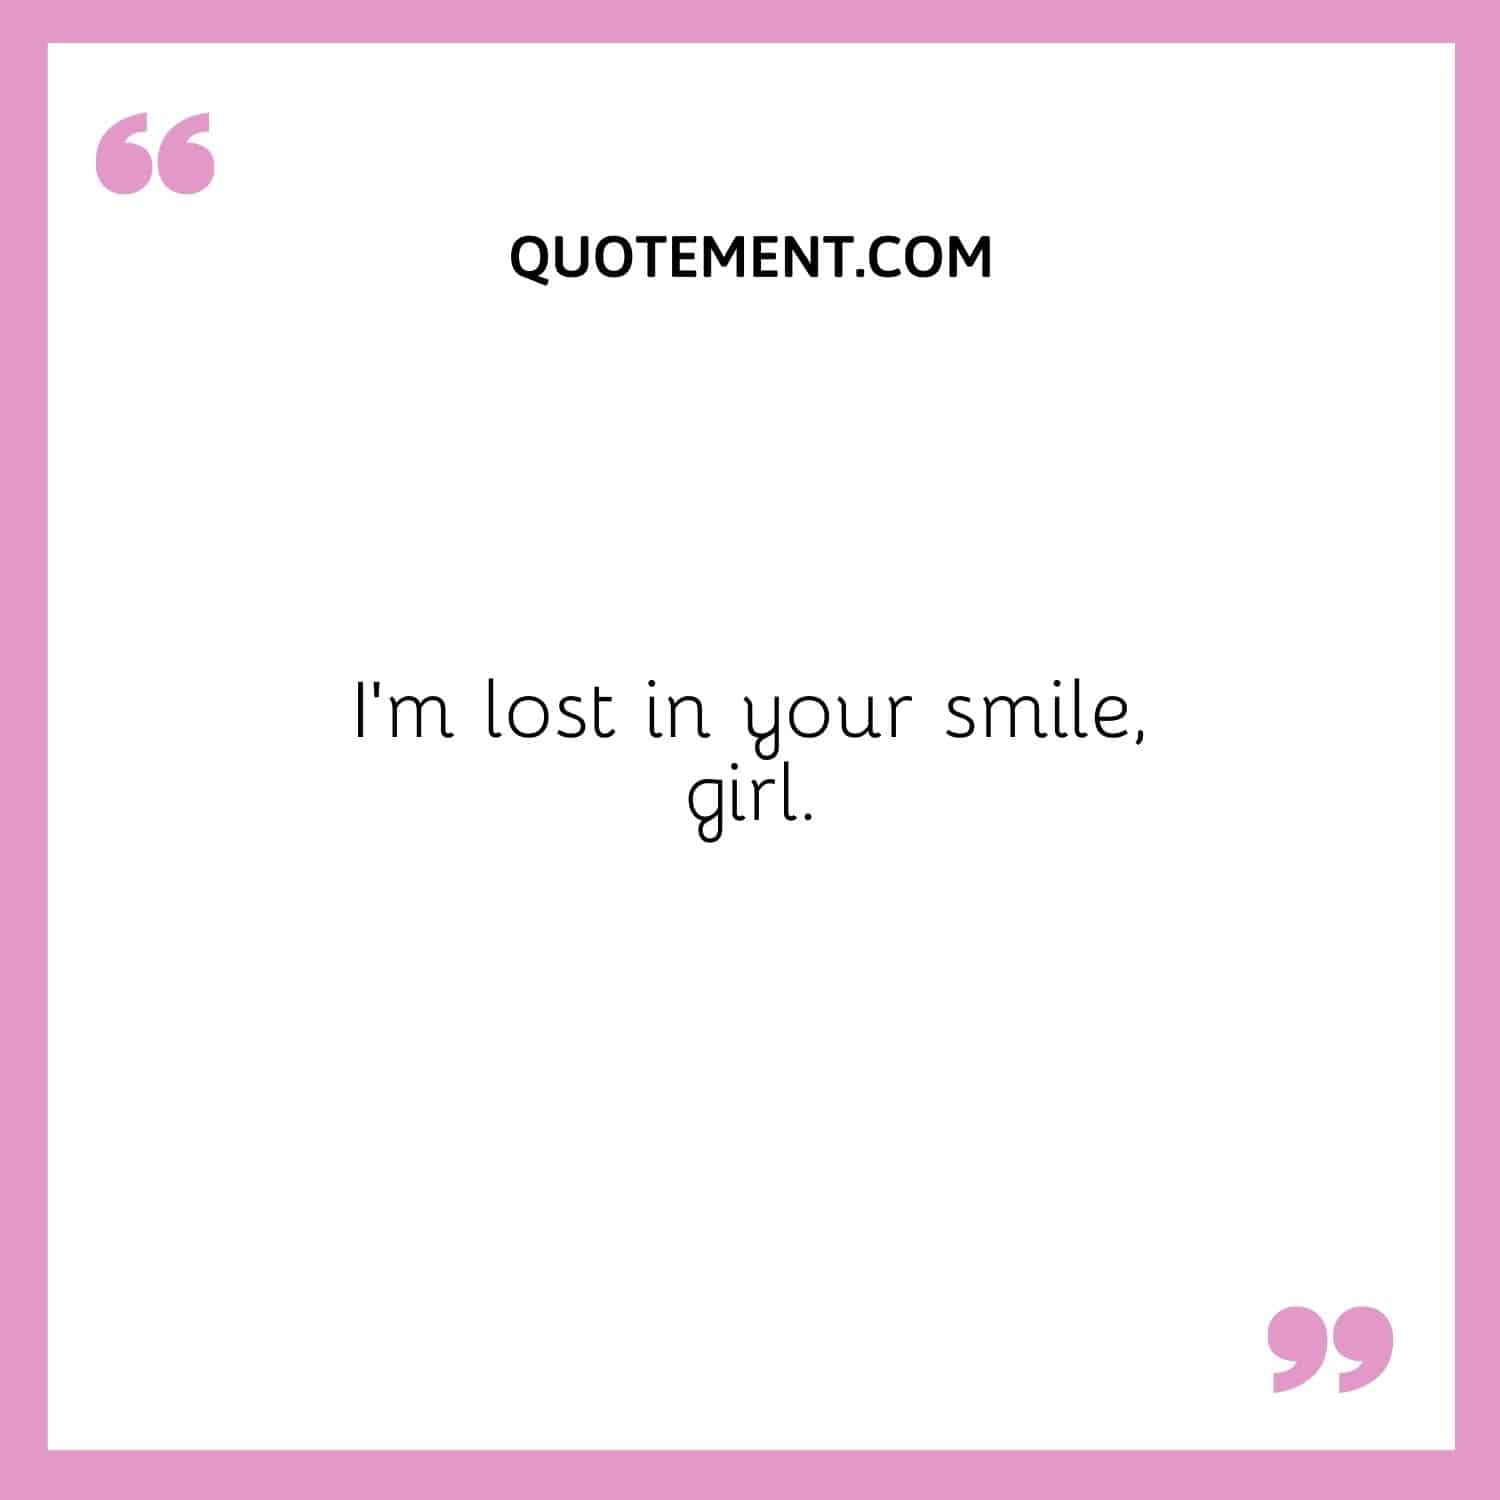 I’m lost in your smile